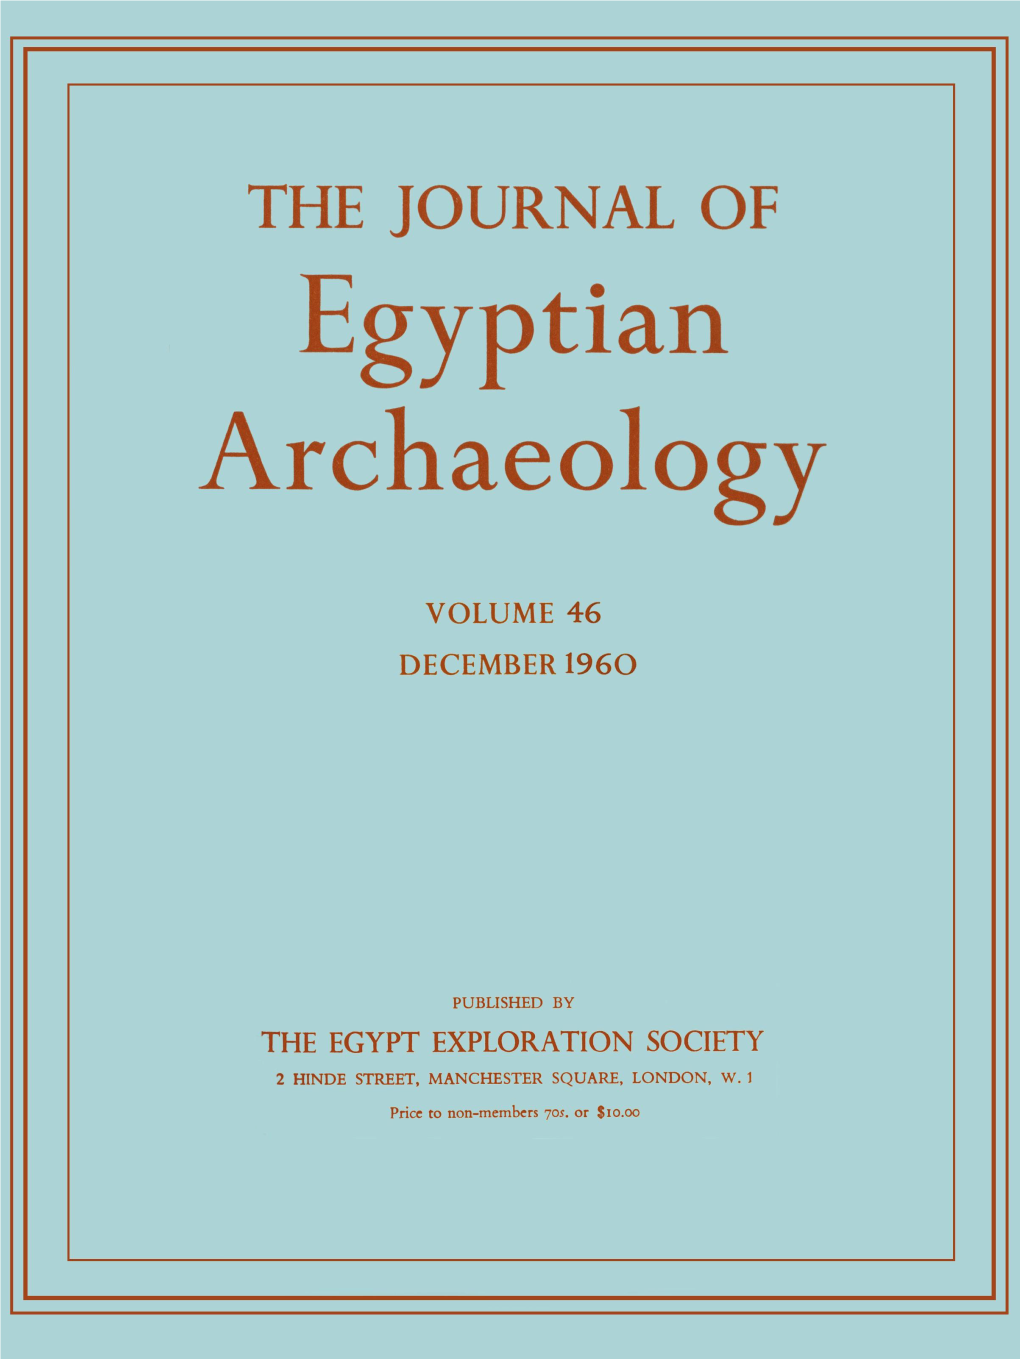 Journal of Egyptian Archaeology, Vol. 46, 1960